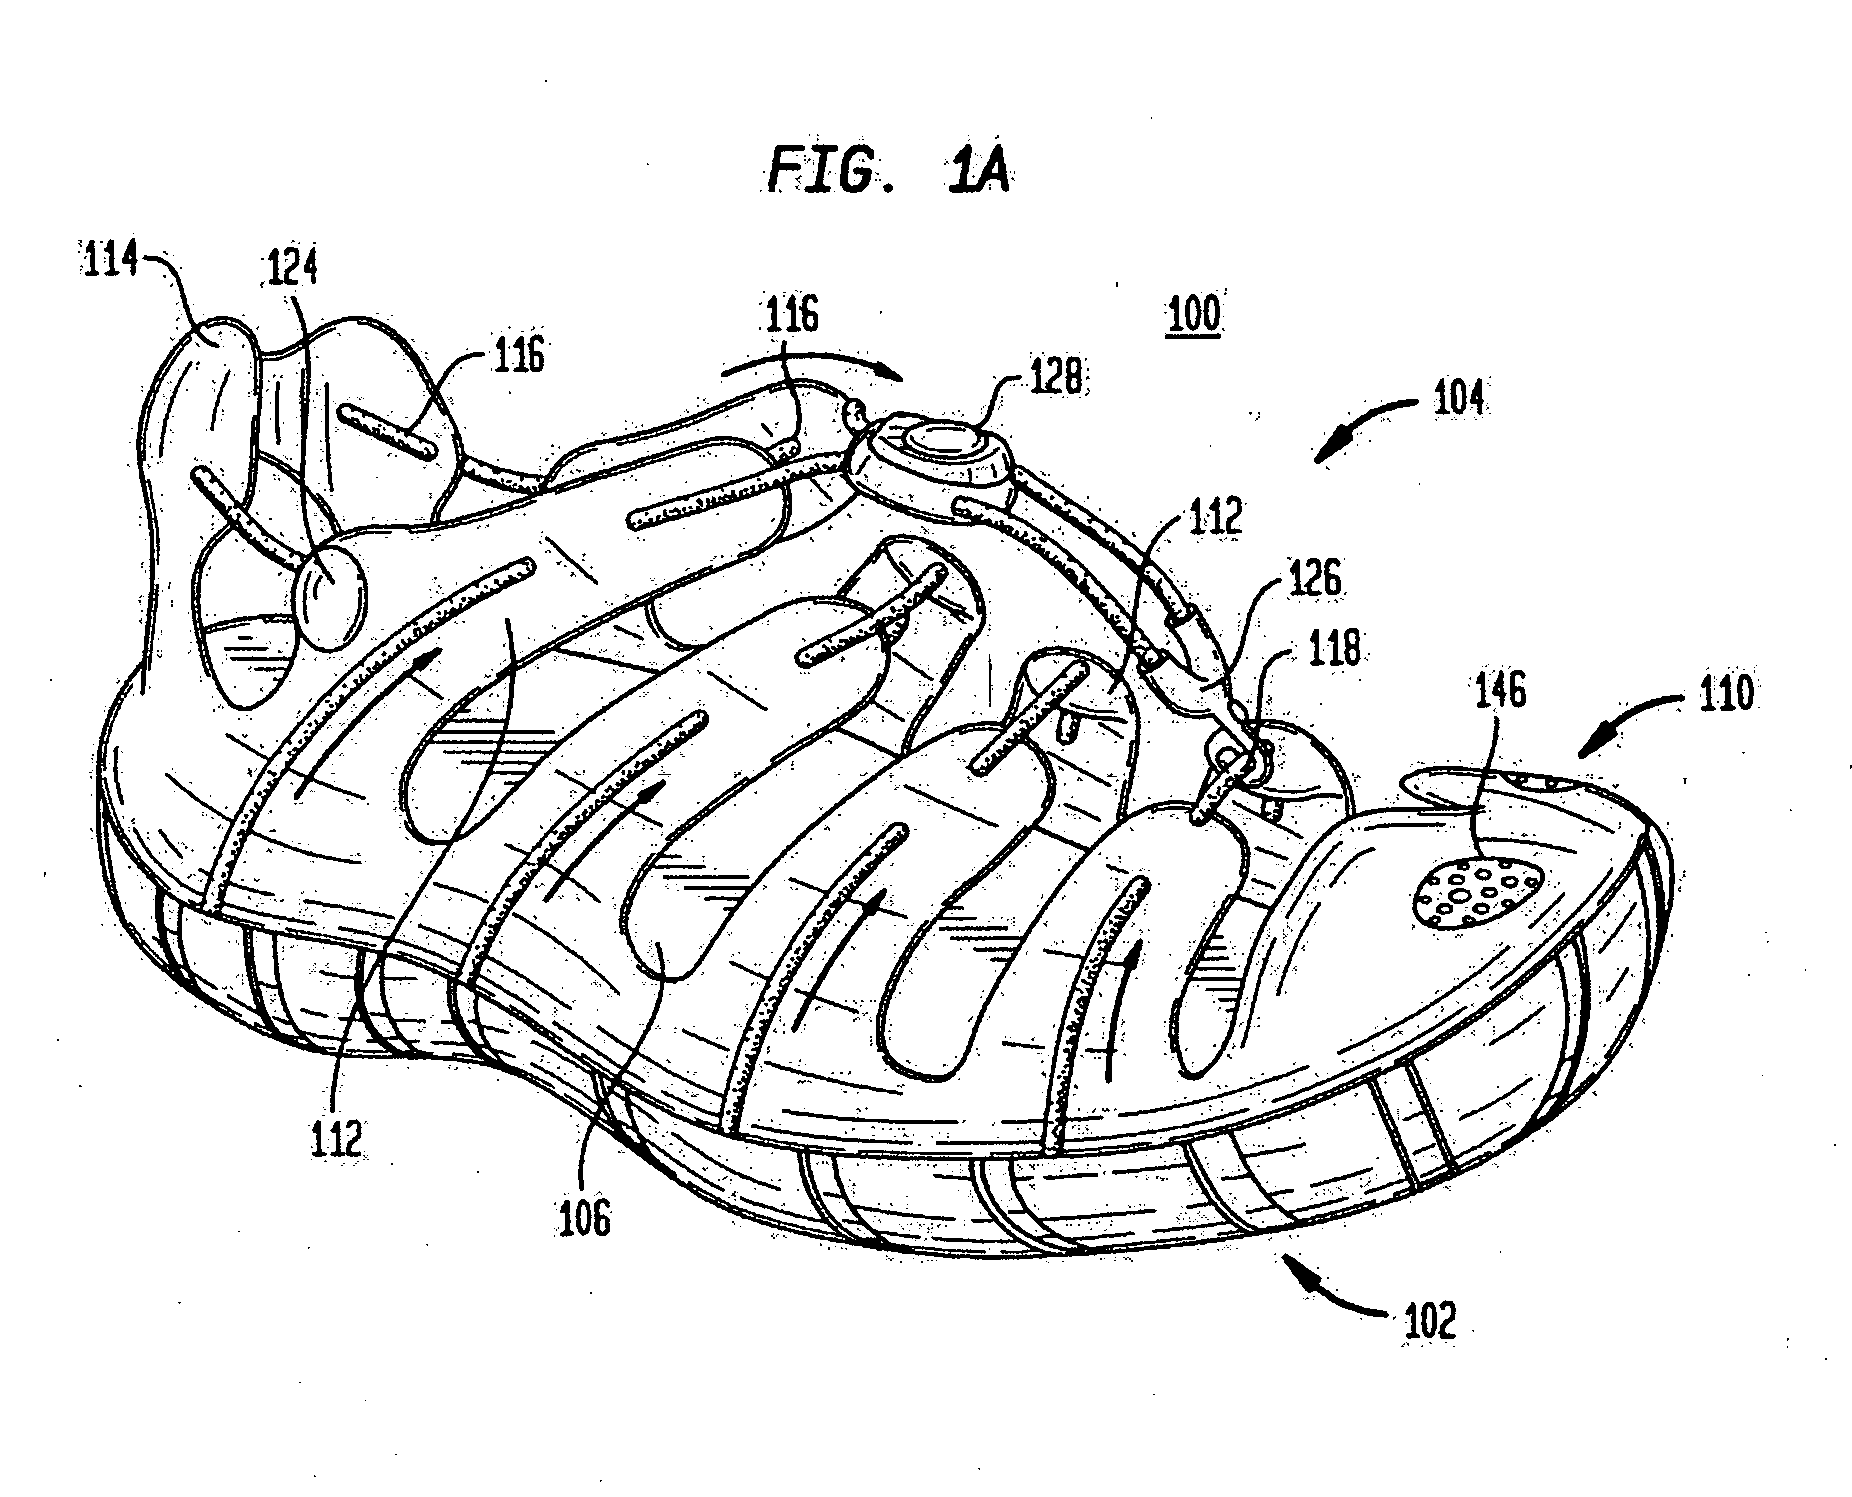 Shoe with anatomical protection